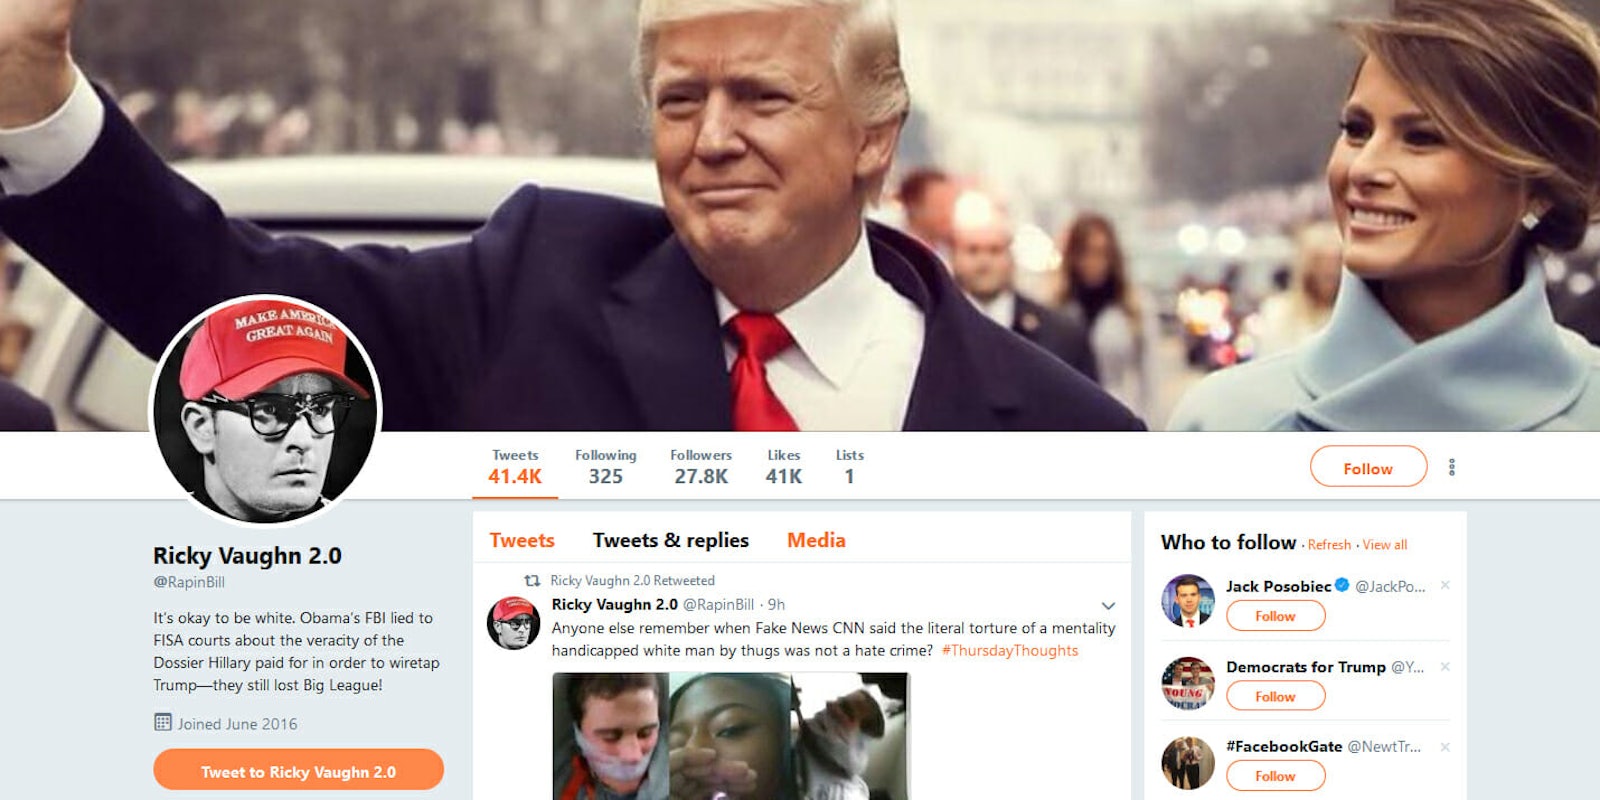 The person behind the popular Ricky Vaughn 2.0 Twitter profile that is aggressively pro-President Donald Trump has been unmasked.